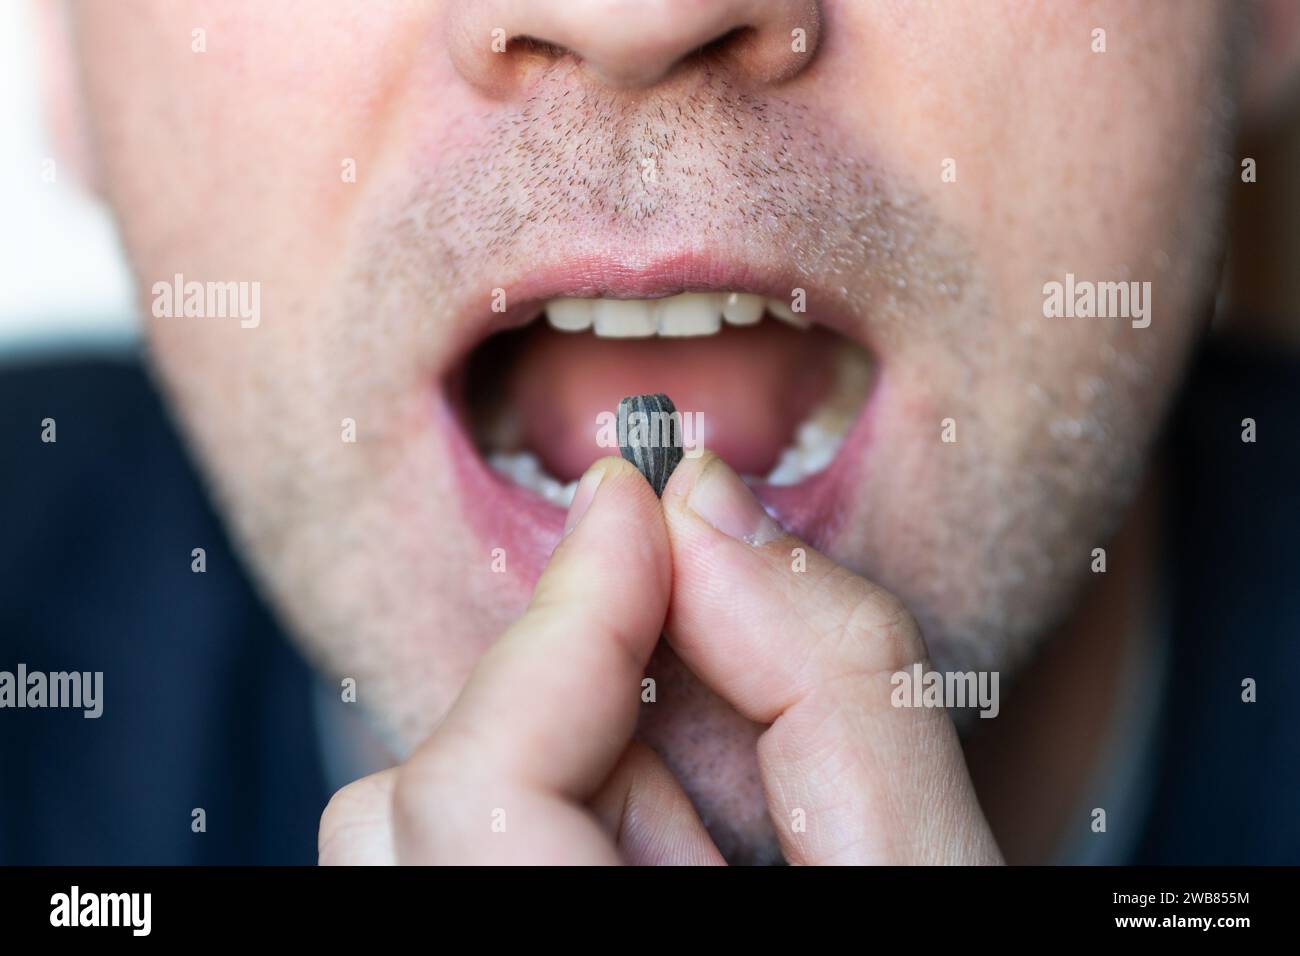 people eating roasted sunflower seed bite at crisp shell to eat seed inside. Black seed in men teeth close-up. open mouth is gnawing on the seeds. Stock Photo